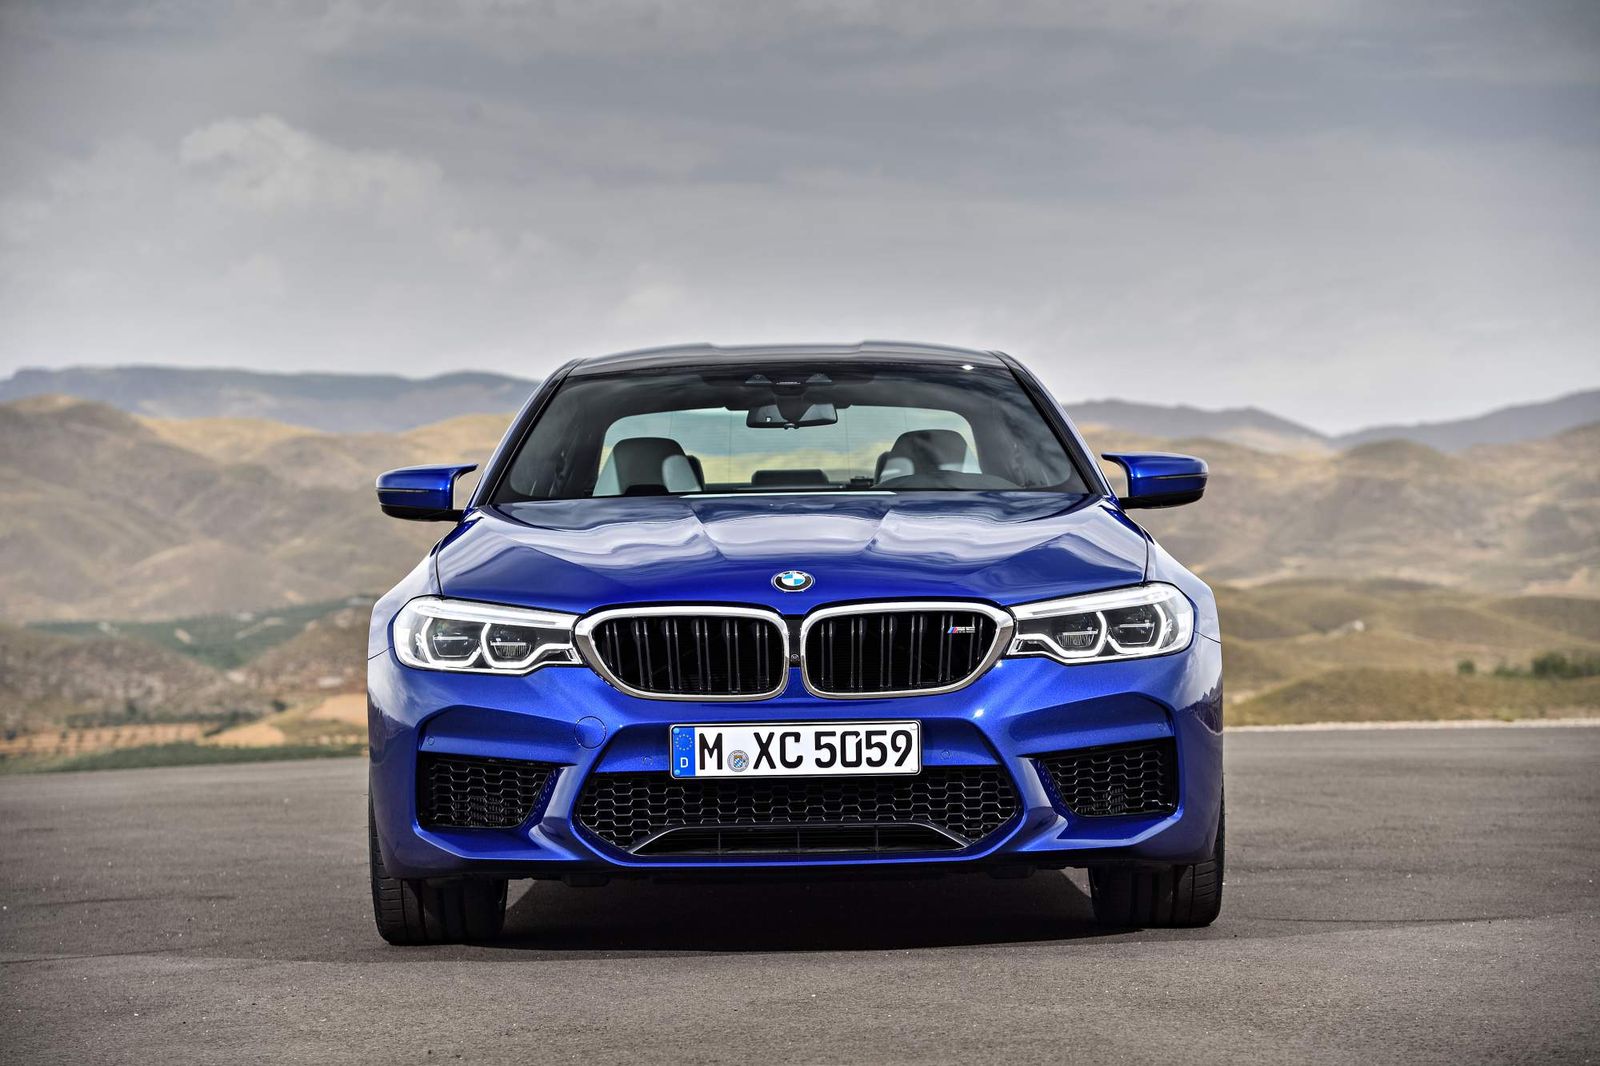 2018 BMW M5 front view